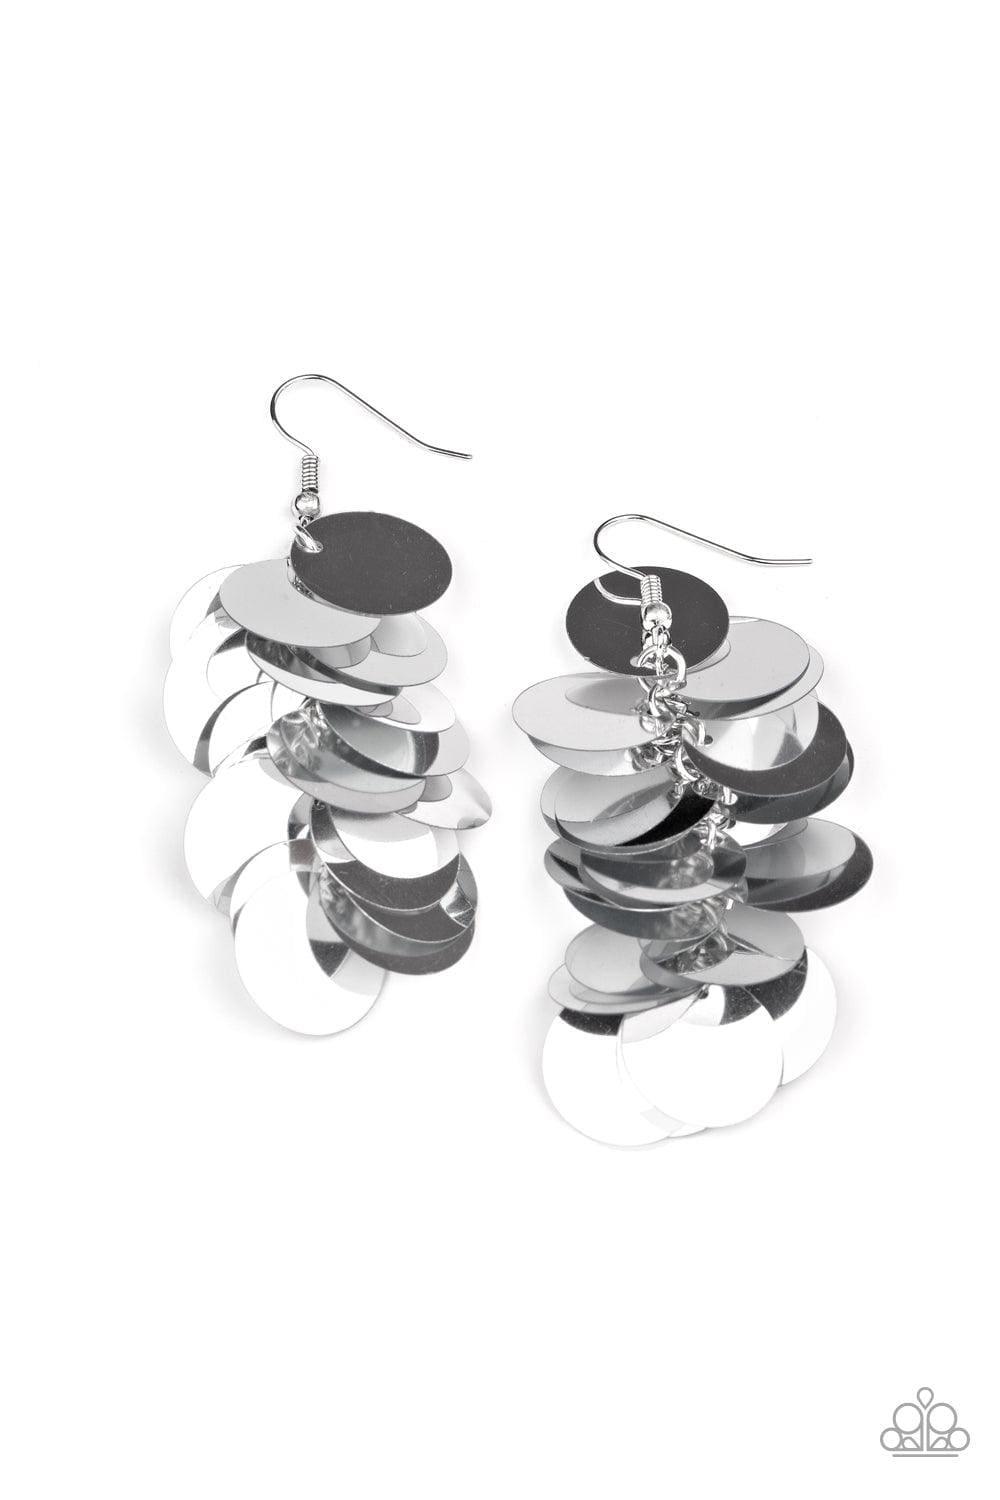 Paparazzi Accessories - Now You Sequin It - Silver Earrings - Bling by JessieK